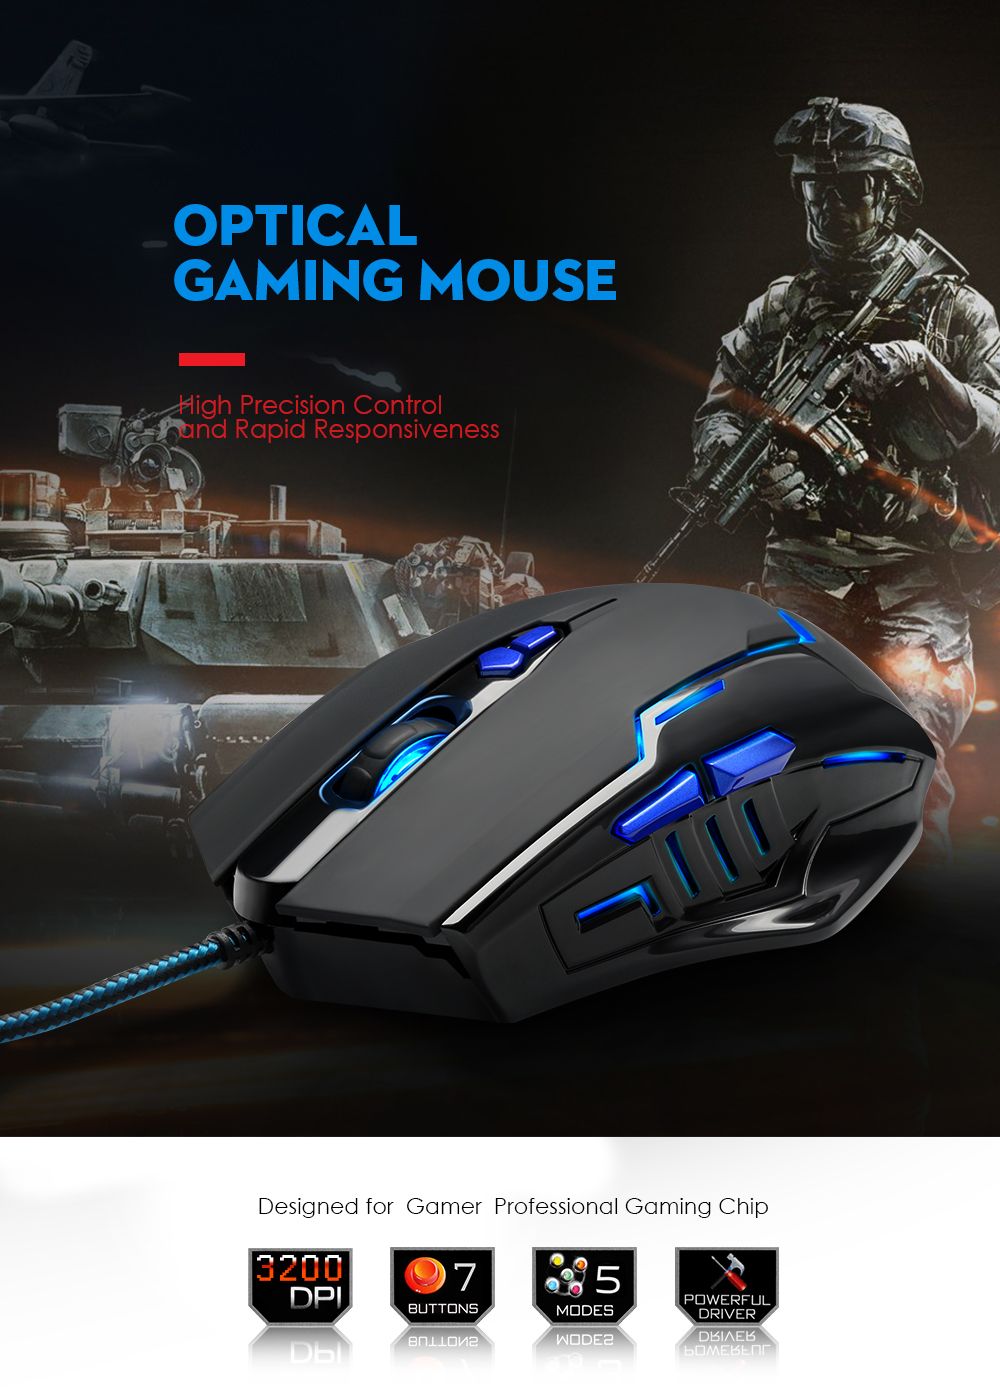 Rocketek-GM02-3200-DPI-7-buttons-Led-Backlight-USB-wired-Gaming-optical-Mouse-for-Game-Laptop-Comput-1658963